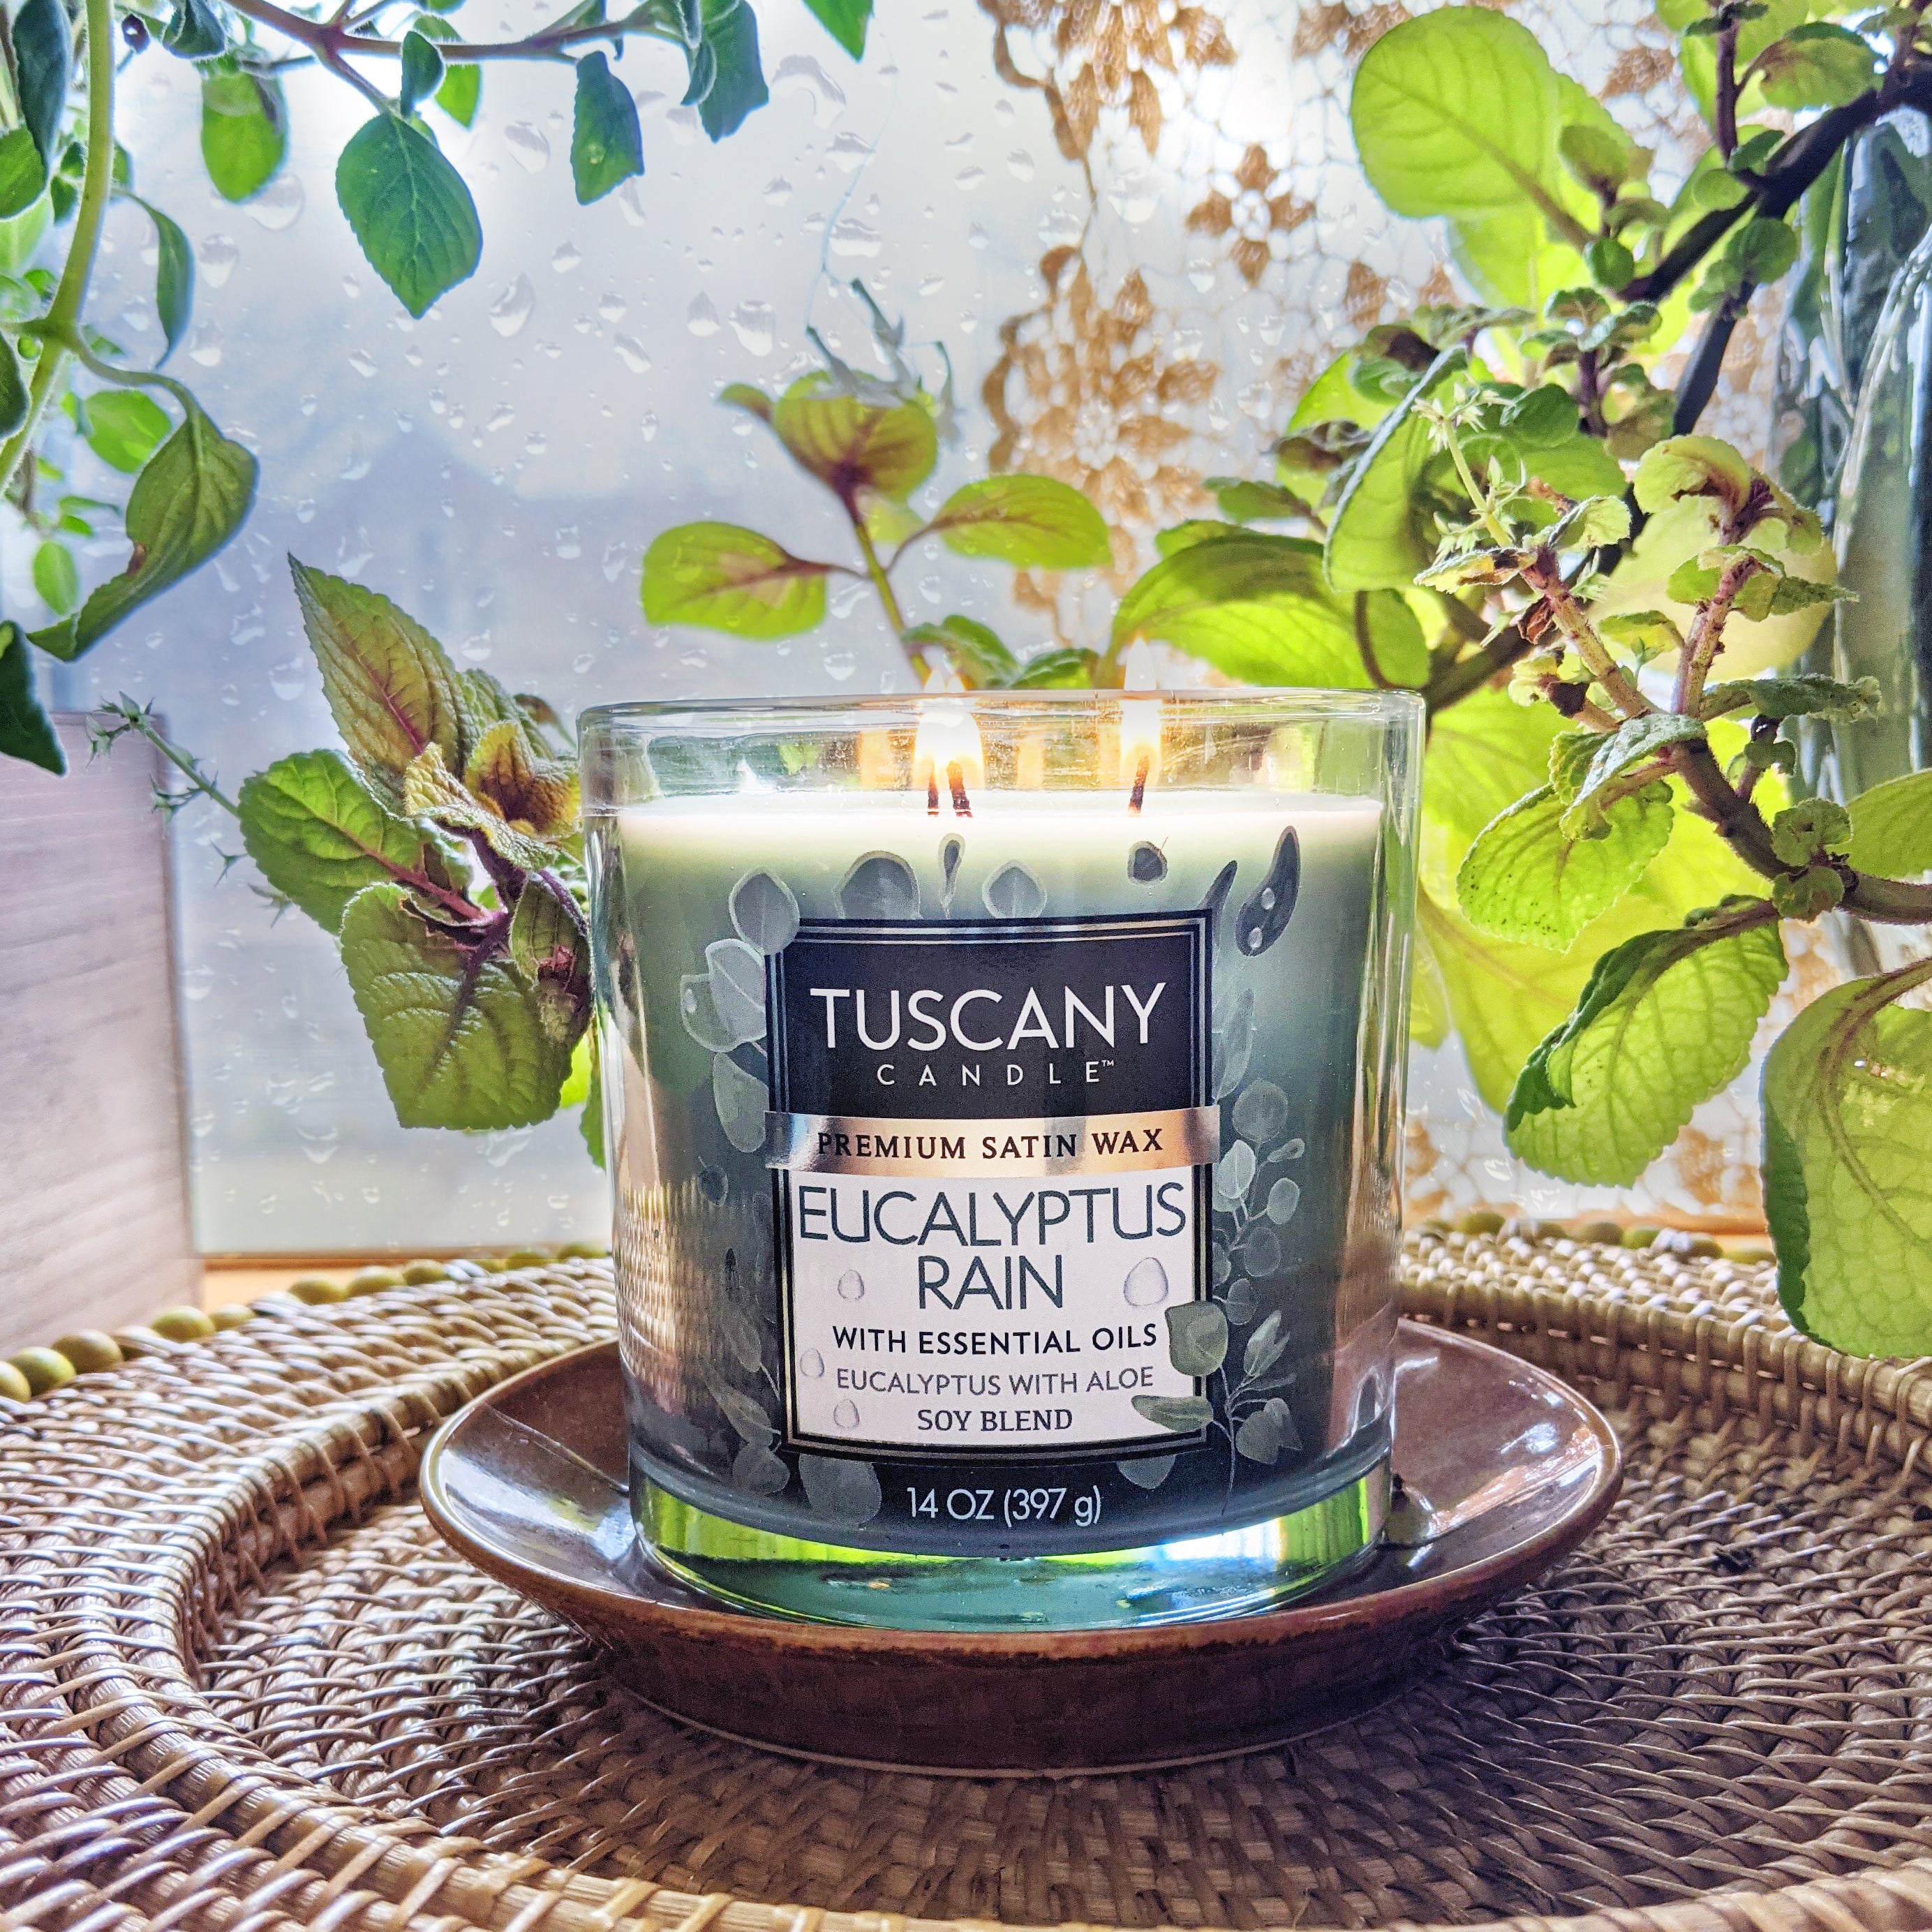 A Eucalyptus Rain Long-Lasting Scented Jar Candle (14 oz) from Tuscany Candle® EVD sits on a plate in front of a window, creating a soothing atmosphere for relaxation.